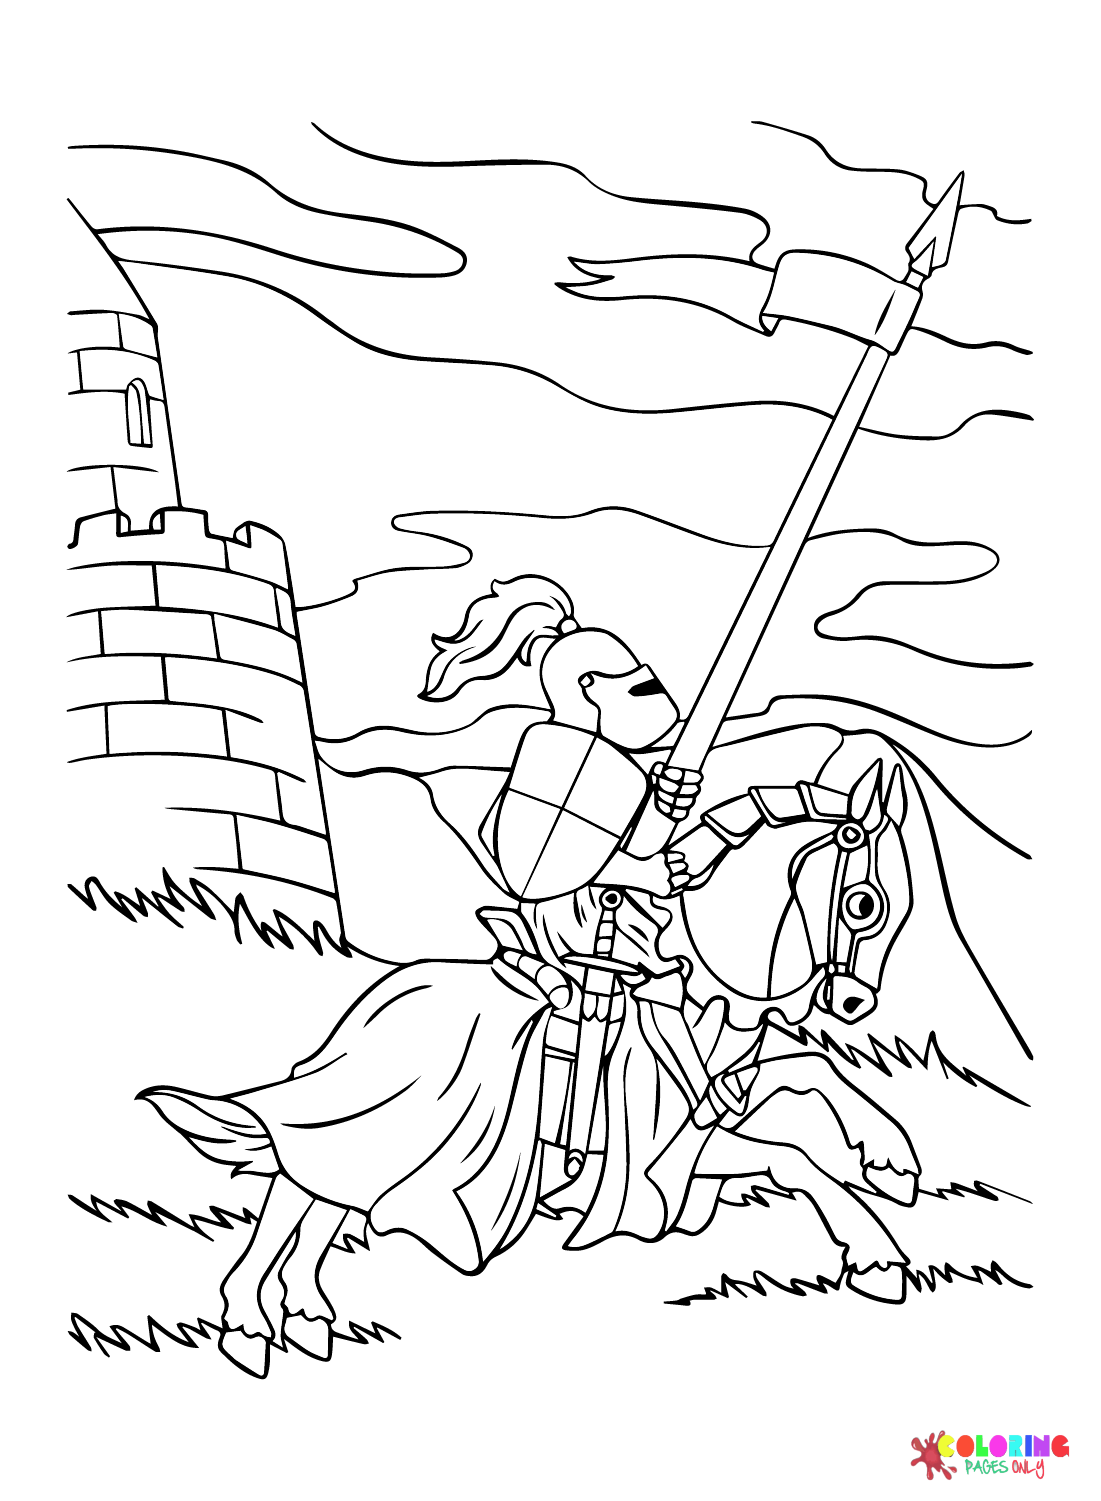 Vector Knight Joust Coloring Page for Kids from Ancient Rome and Roman Empire